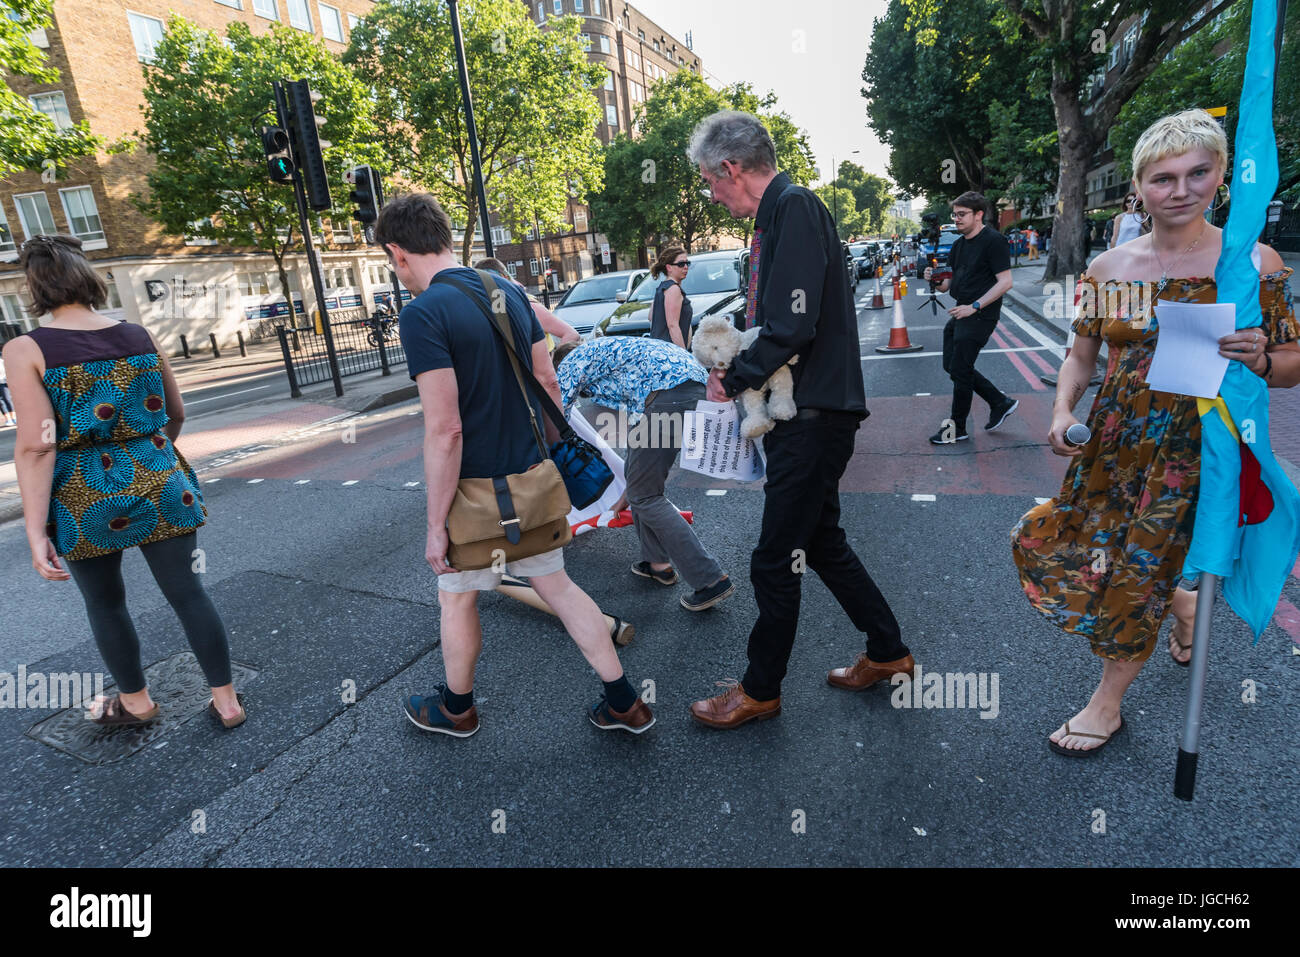 London, UK. 5th July 2017. Rising Up campaigners walk into the road for their brief 'Staying' Alive' road-block disco on the east-bound carriageway of the Marylebone Road near Baker St to raise awareness about the terribly high pollution levels on London streets caused largely by traffic. They walked onto a pedestrian crossing, raised a banner, spoke briefly about the problem and then danced, holding up notices to the blocked motorists apologising  for the protest but pointing out that urgent action was needed and the protest would be short. One Volvo driver got out of his car and argued angri Stock Photo